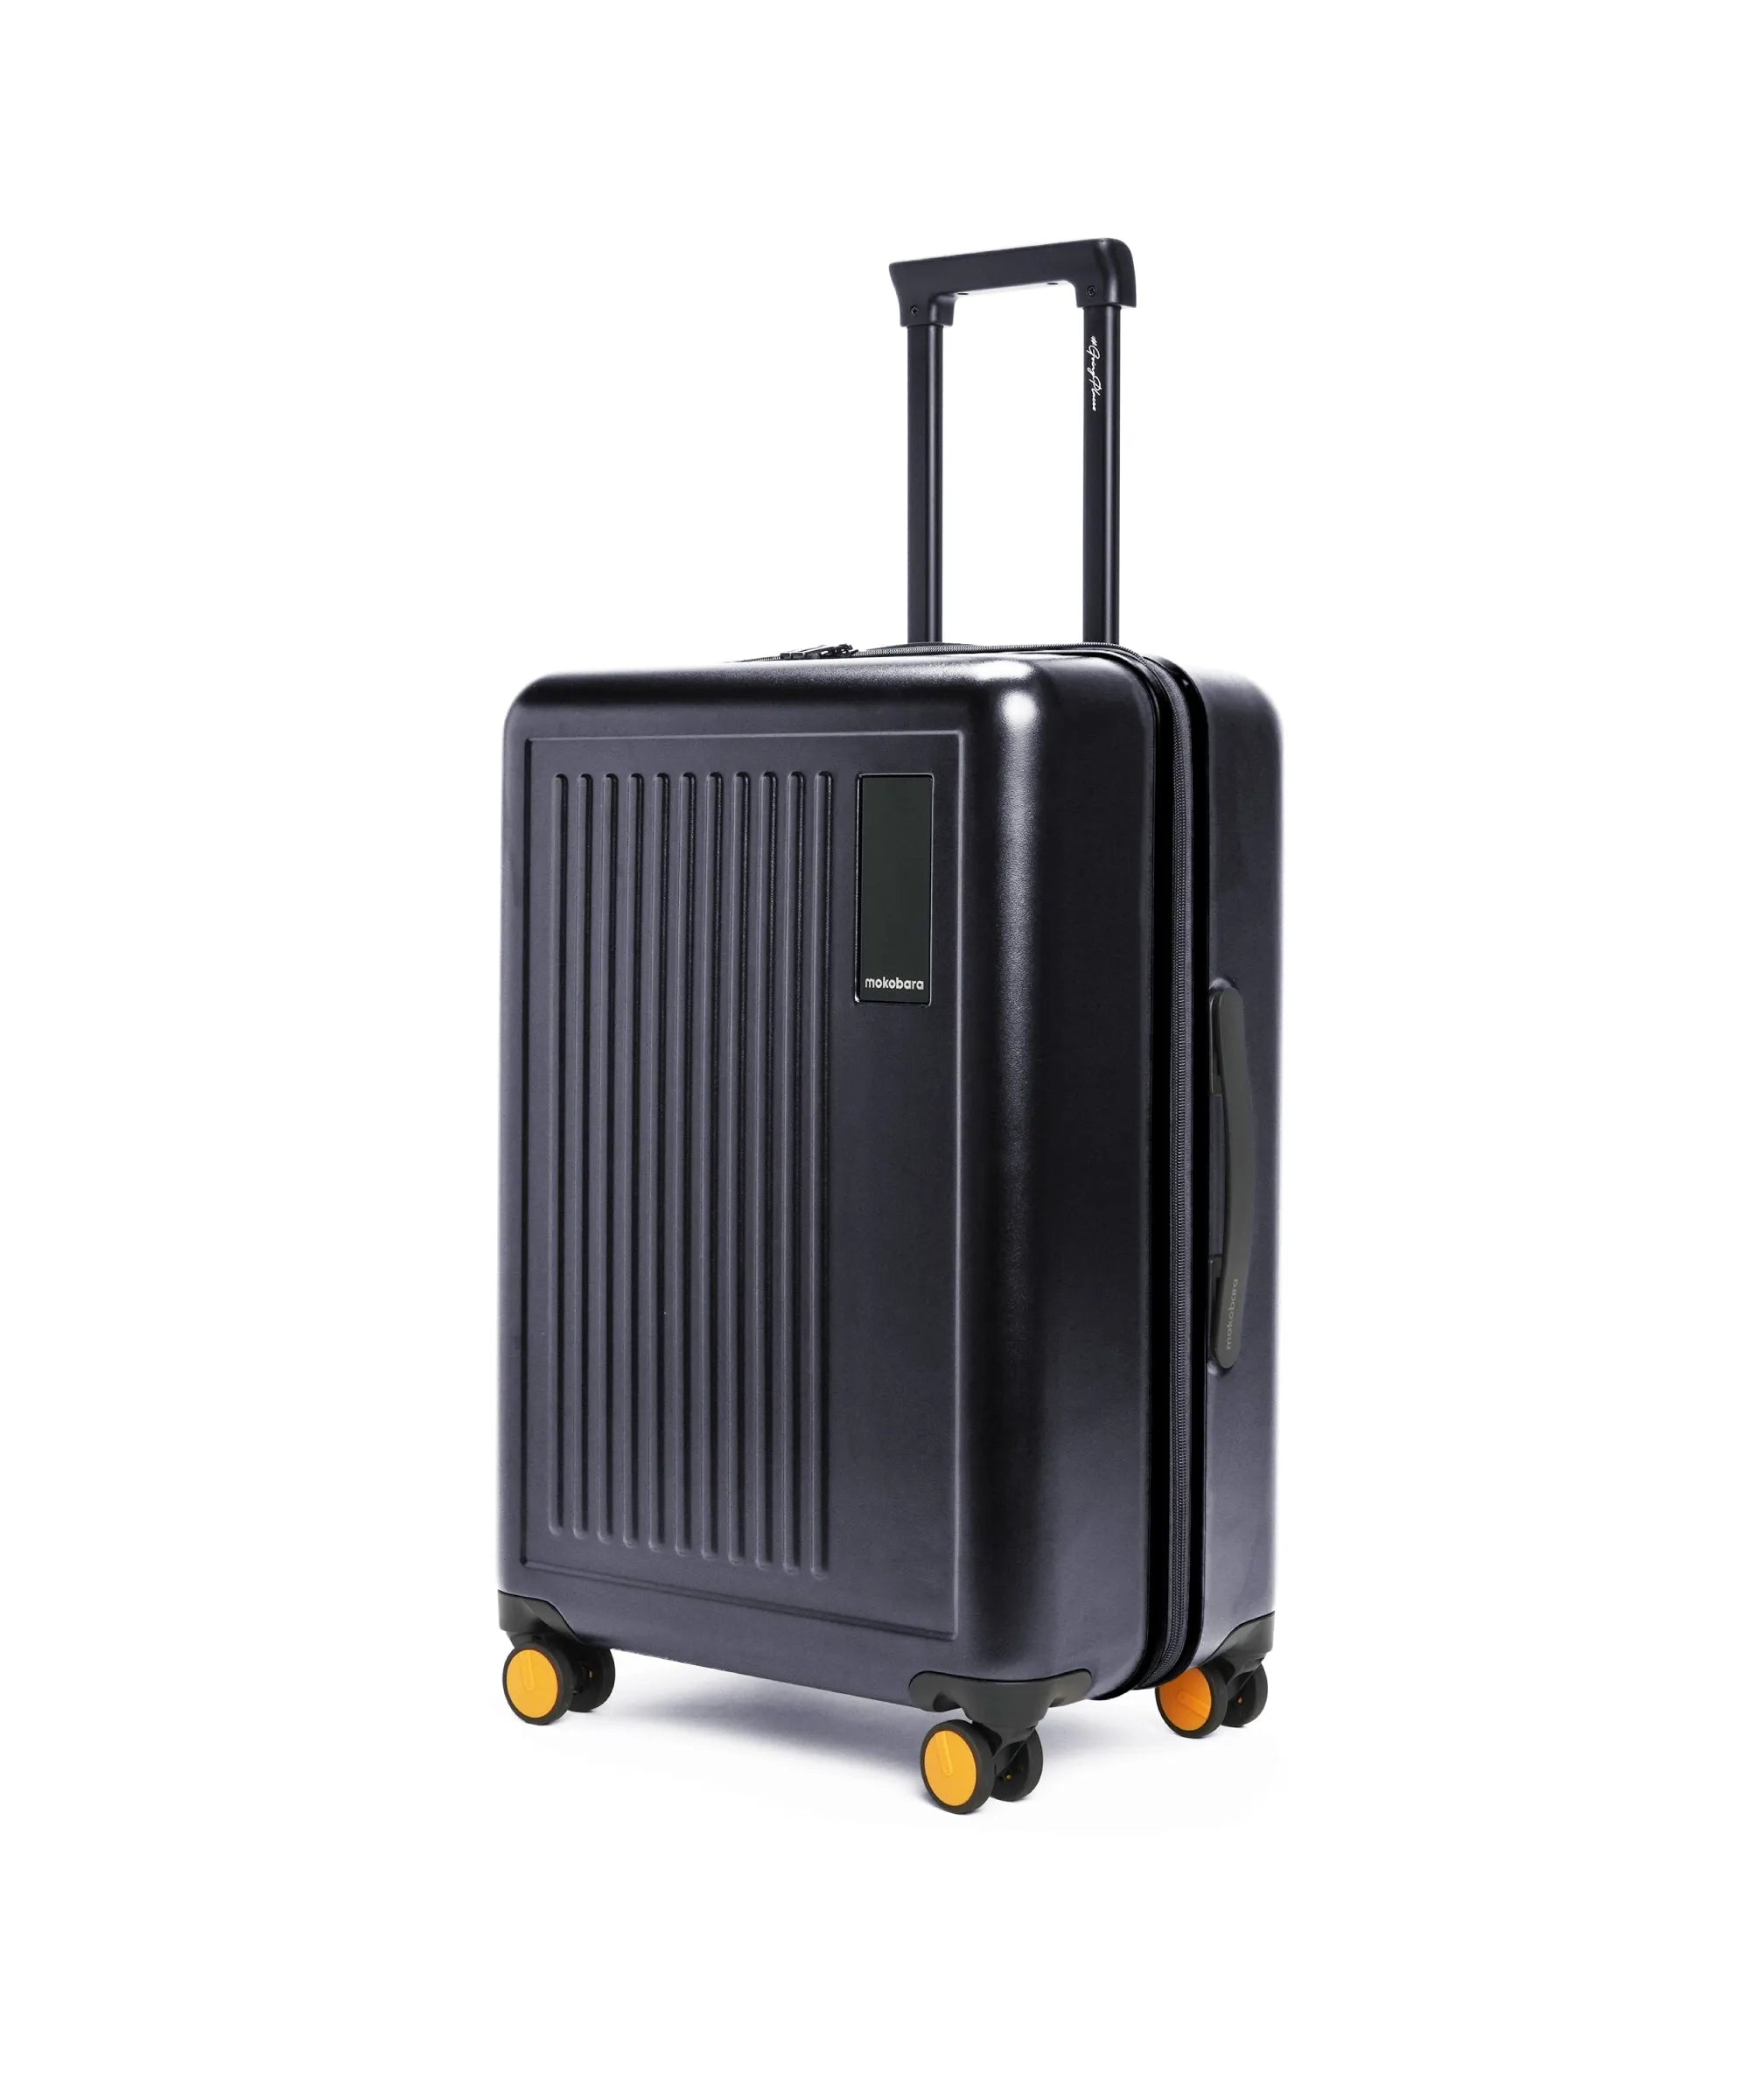 Color_Crypto | The Transit Luggage - Check-in